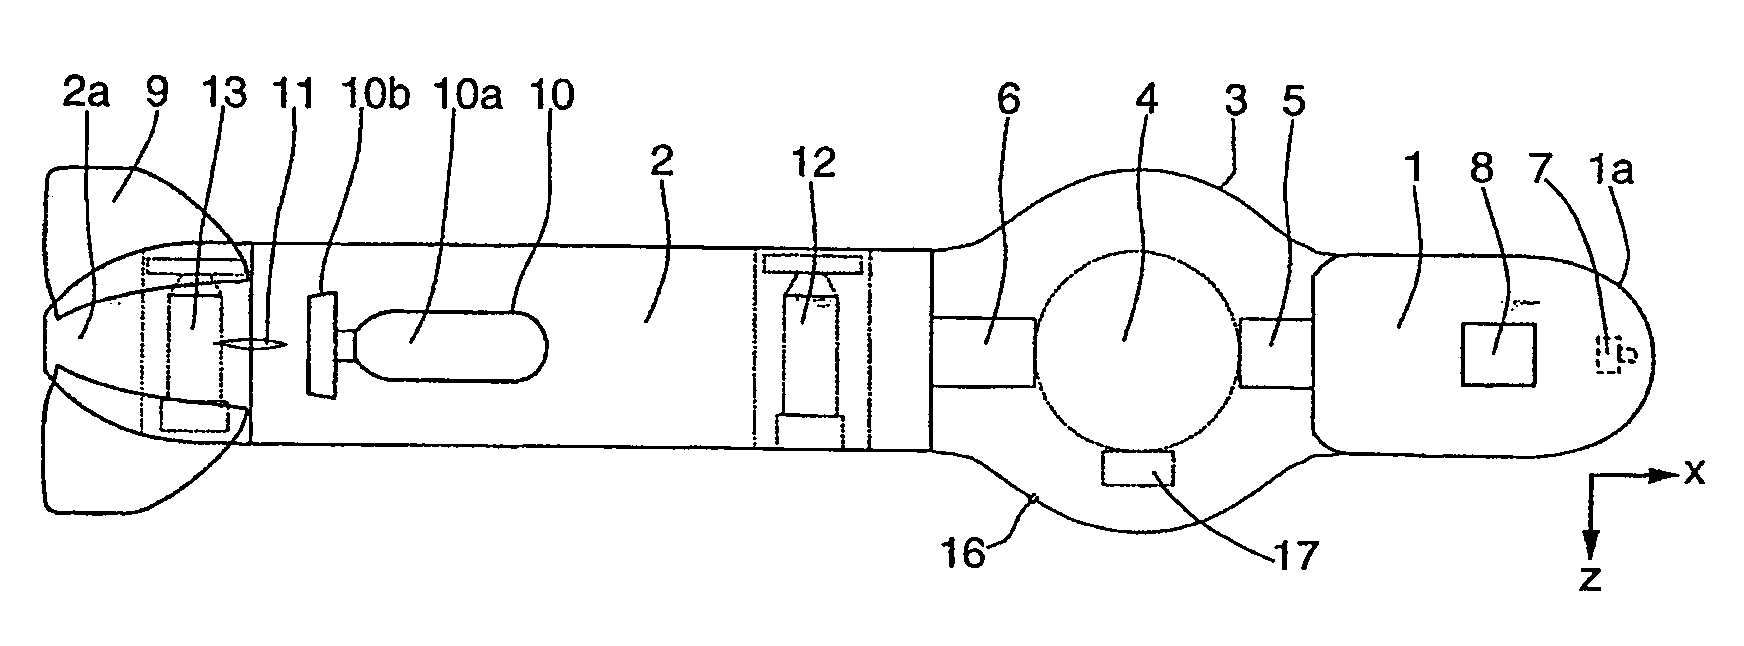 Device for Distroying Subsea or Floating Objects